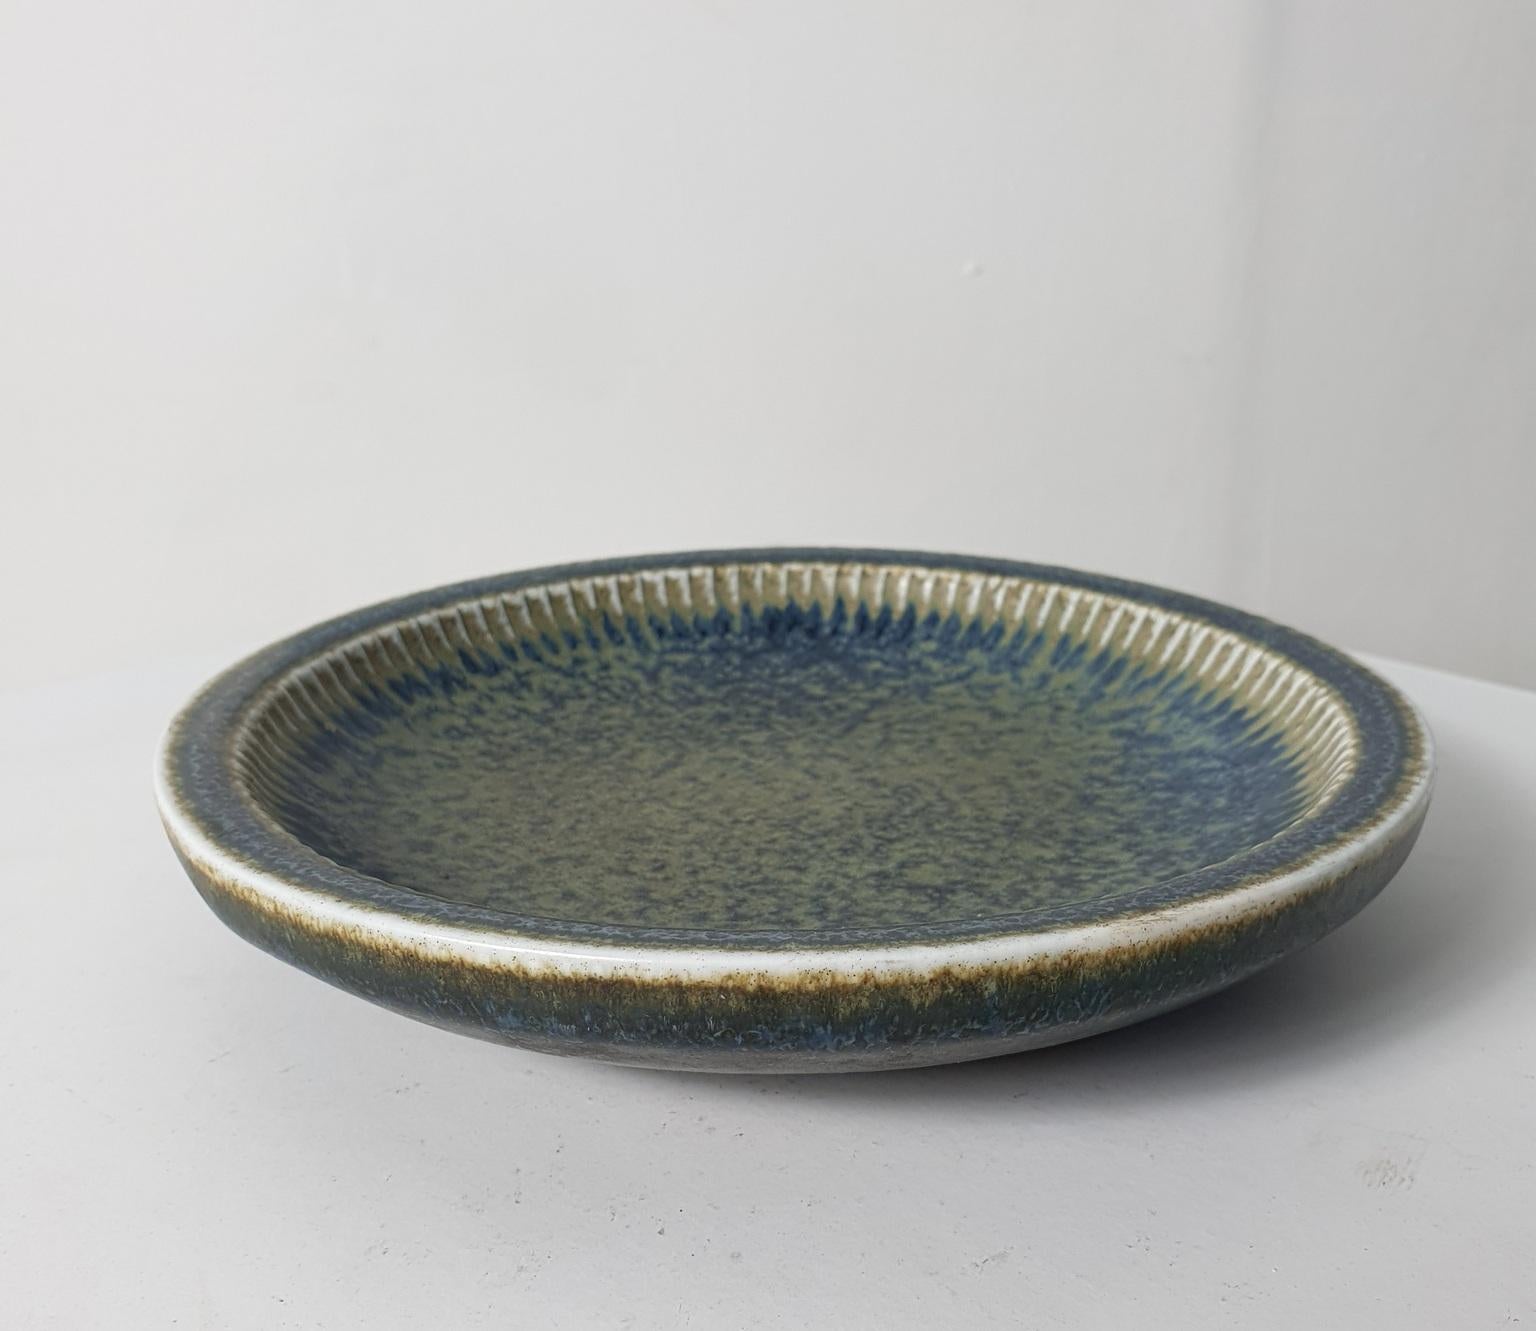 Blue plate bowl from Swedish manufacturer Rörstrand signed with the R with three crowns, Carl-Harry Stålhane, Sweden and SGX for the model. The glaze is beautiful in the colors of blue harzefur (type of glaze).